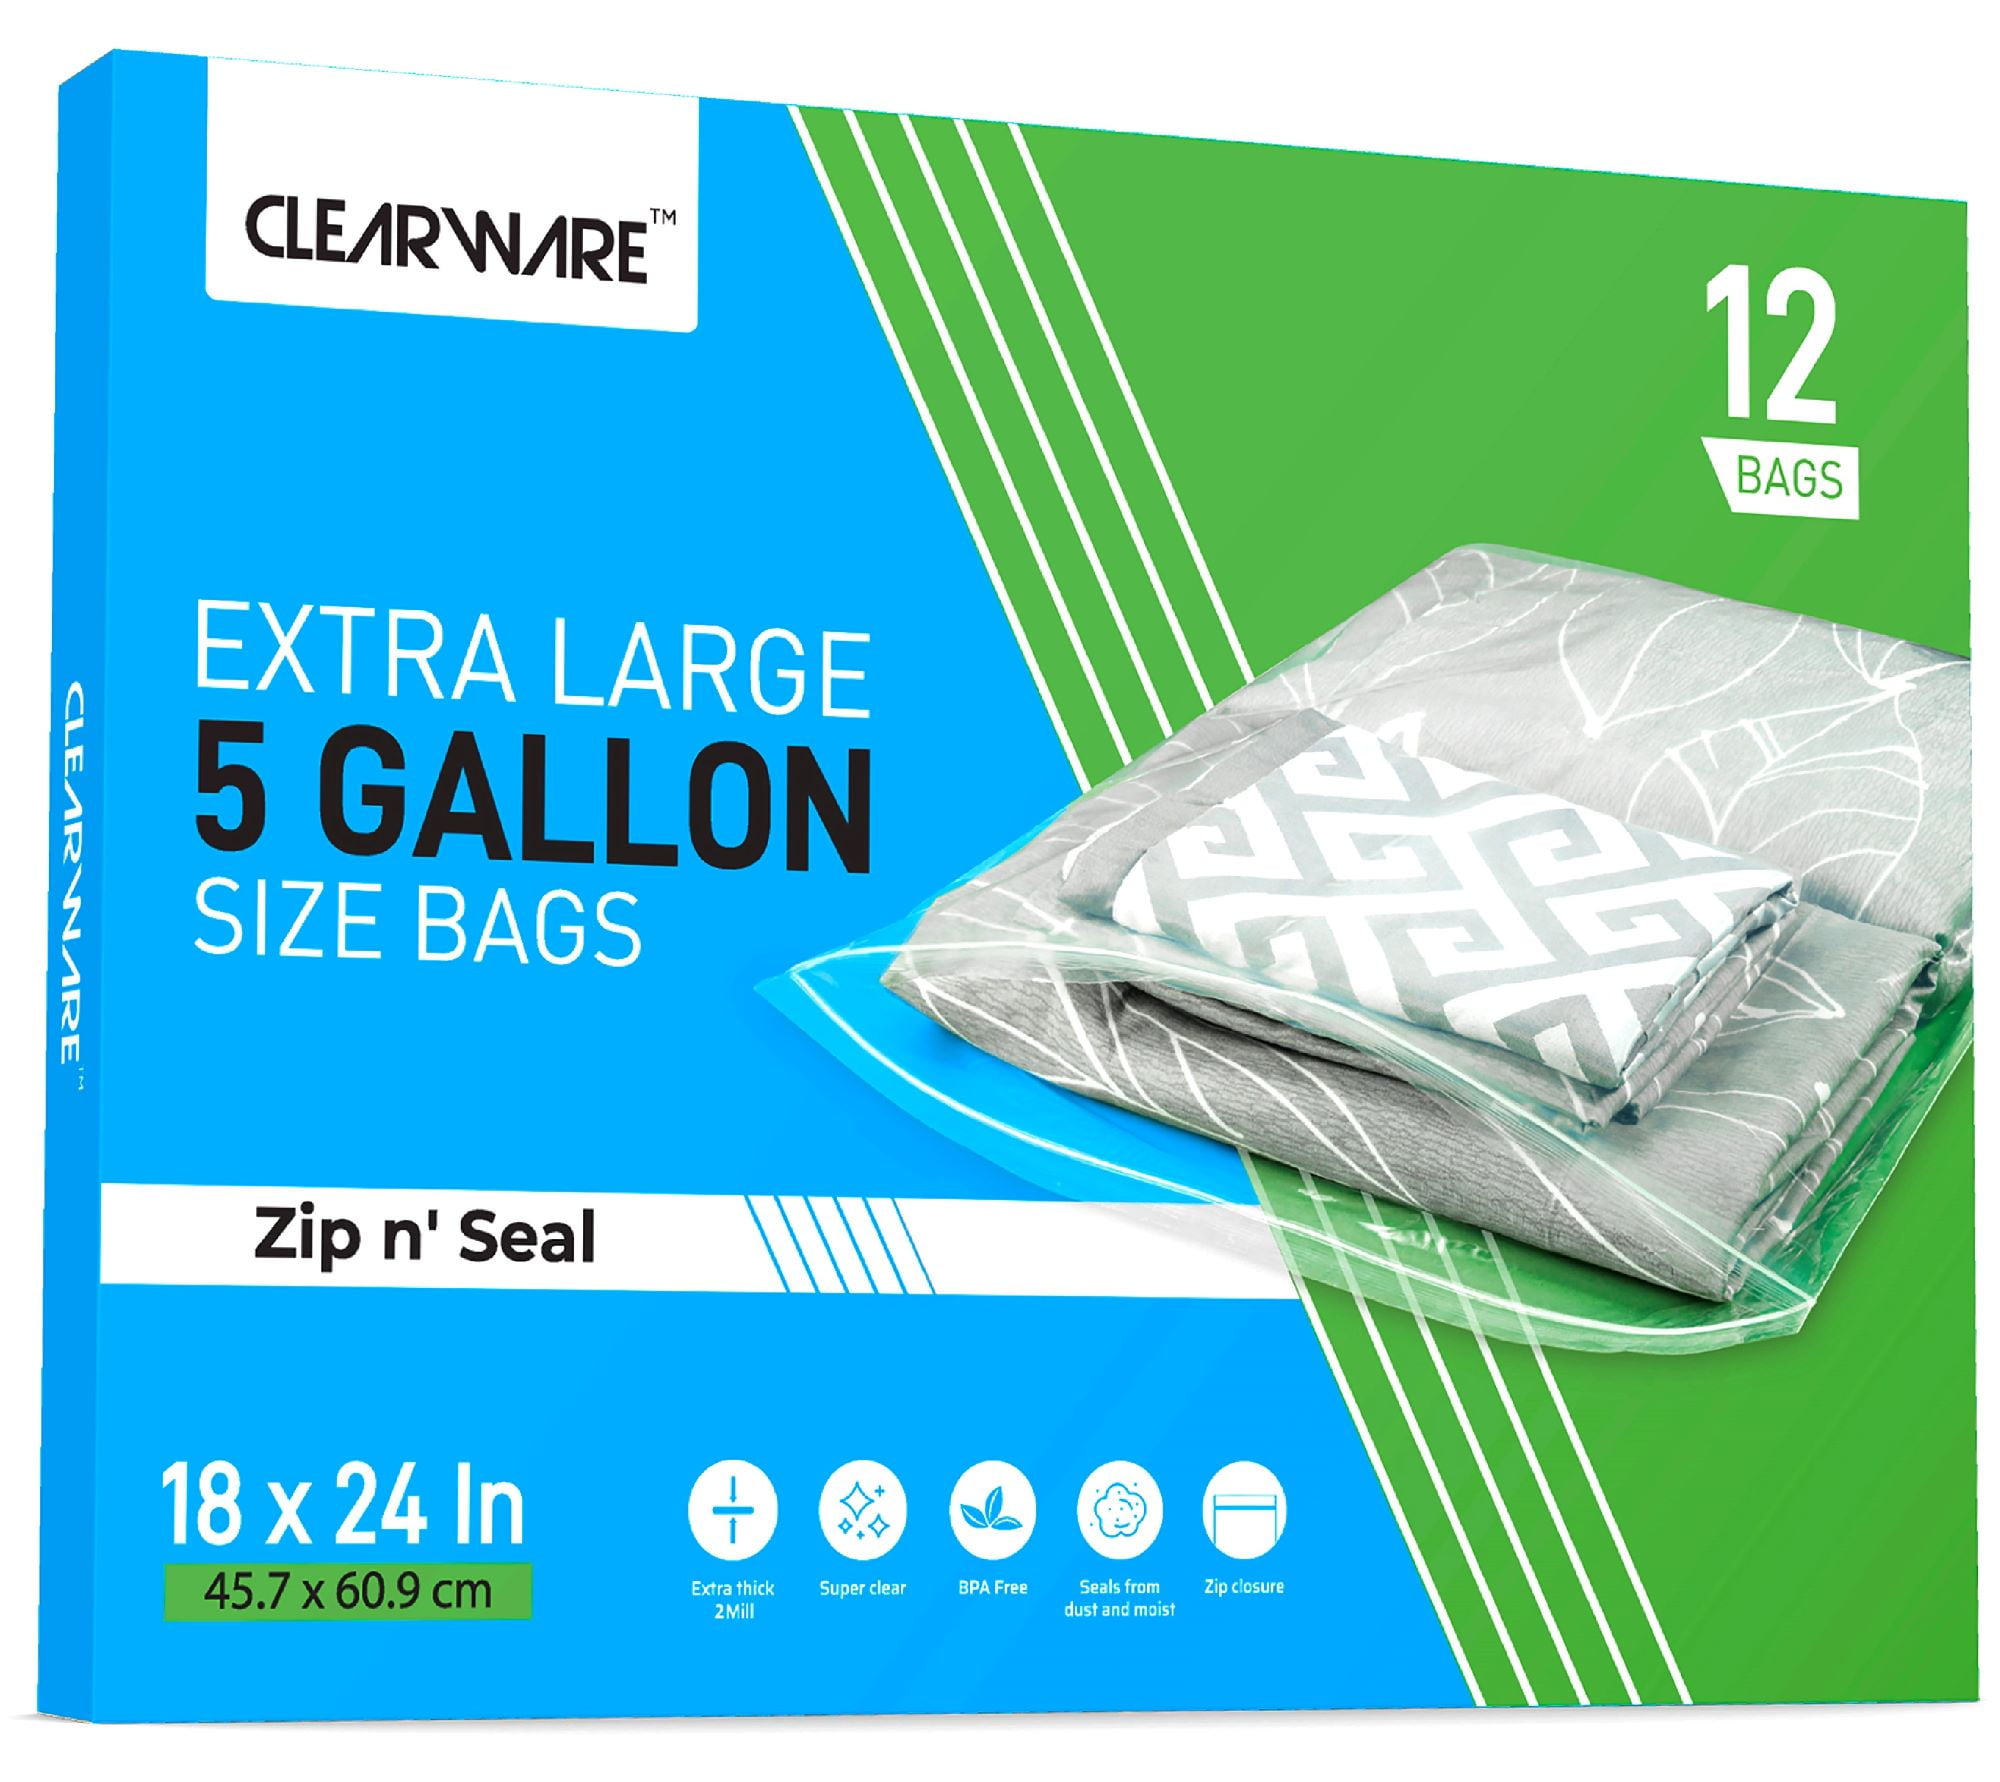  Clearware 50 Large Plastic Bags With Zipper Top - 5 Gallon Bags  18 x 24, Extra Large Storage Bags for Clothes, Travel, Moving, Large  Reusable freezer bags, BPA-Free, 2-mil Thick Clear